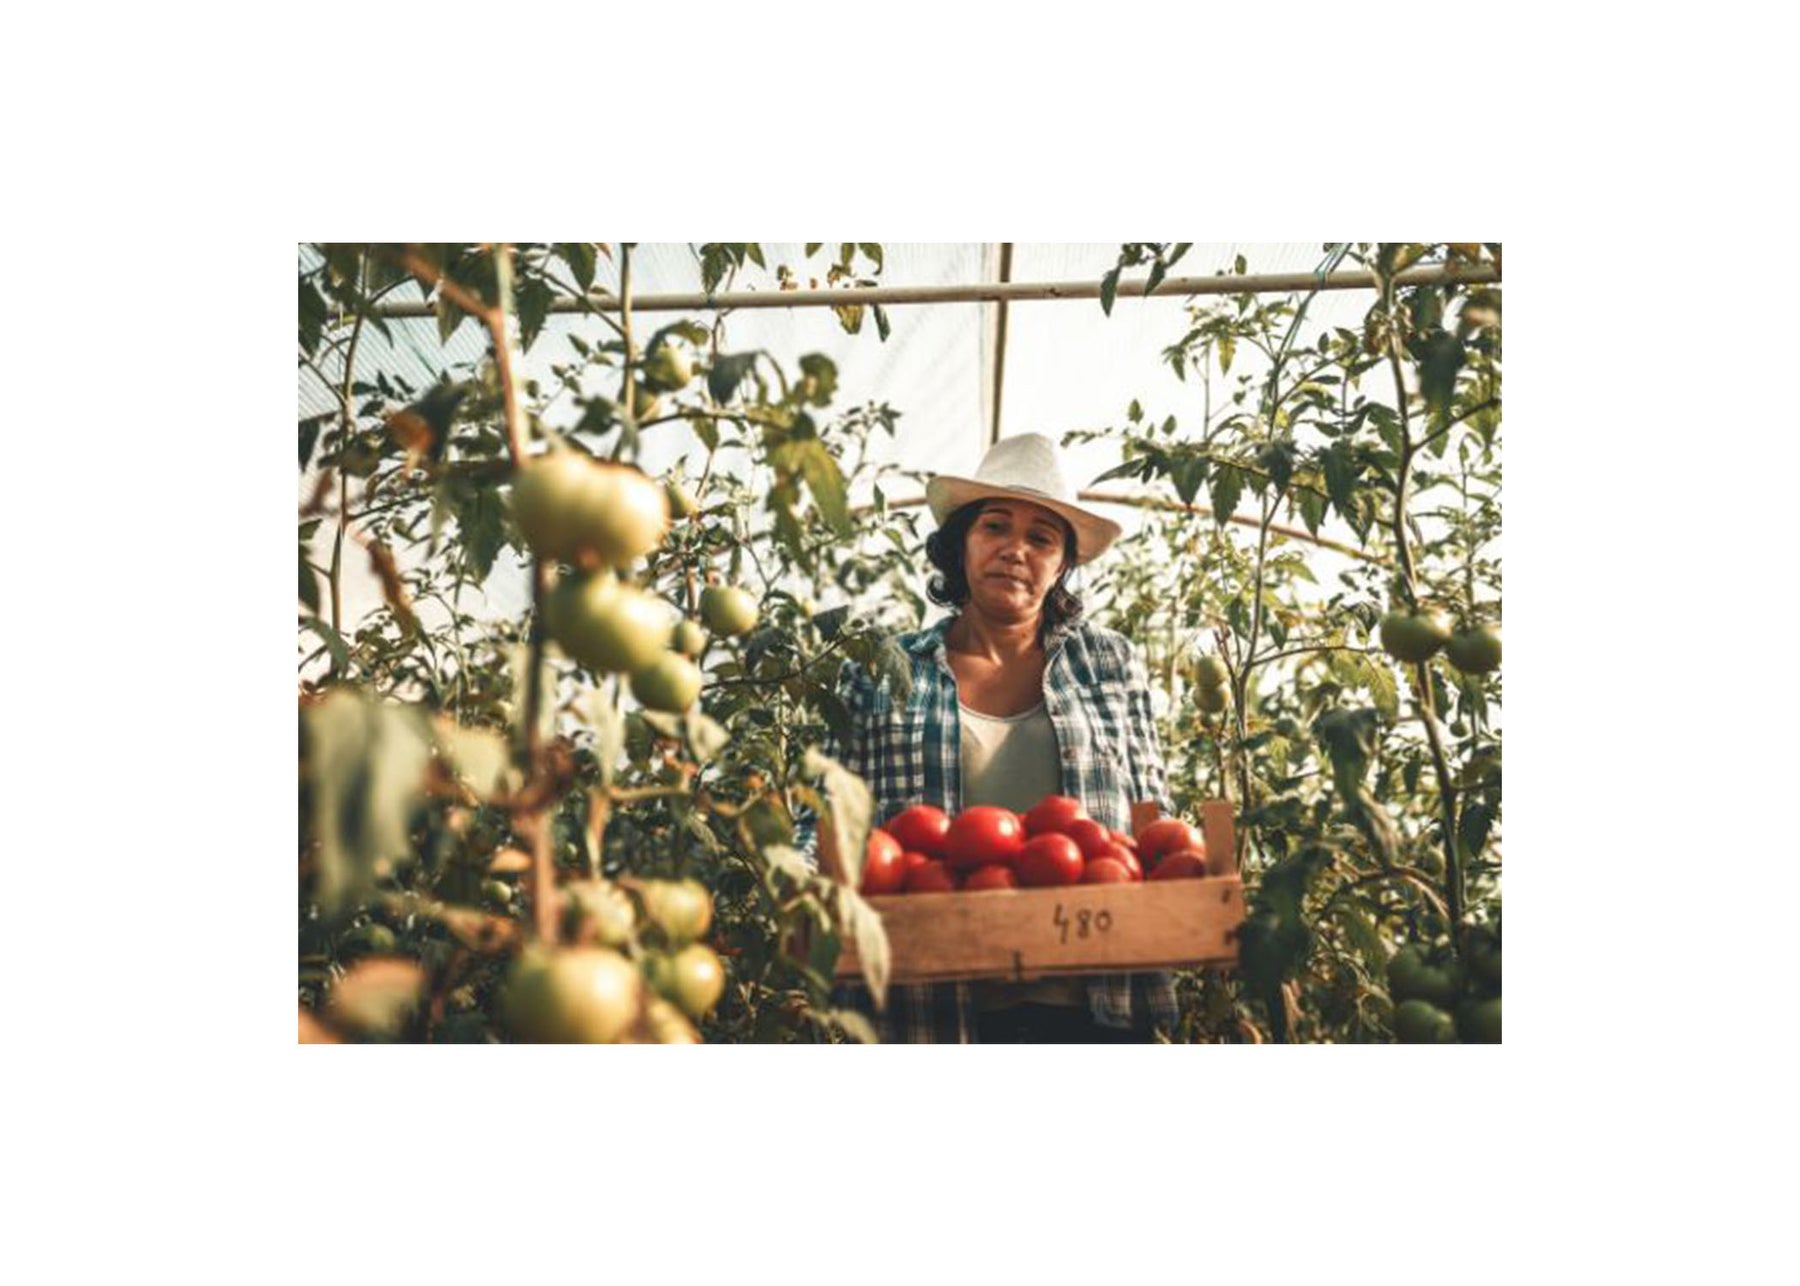 Overtime Requirements for California Agricultural Workers